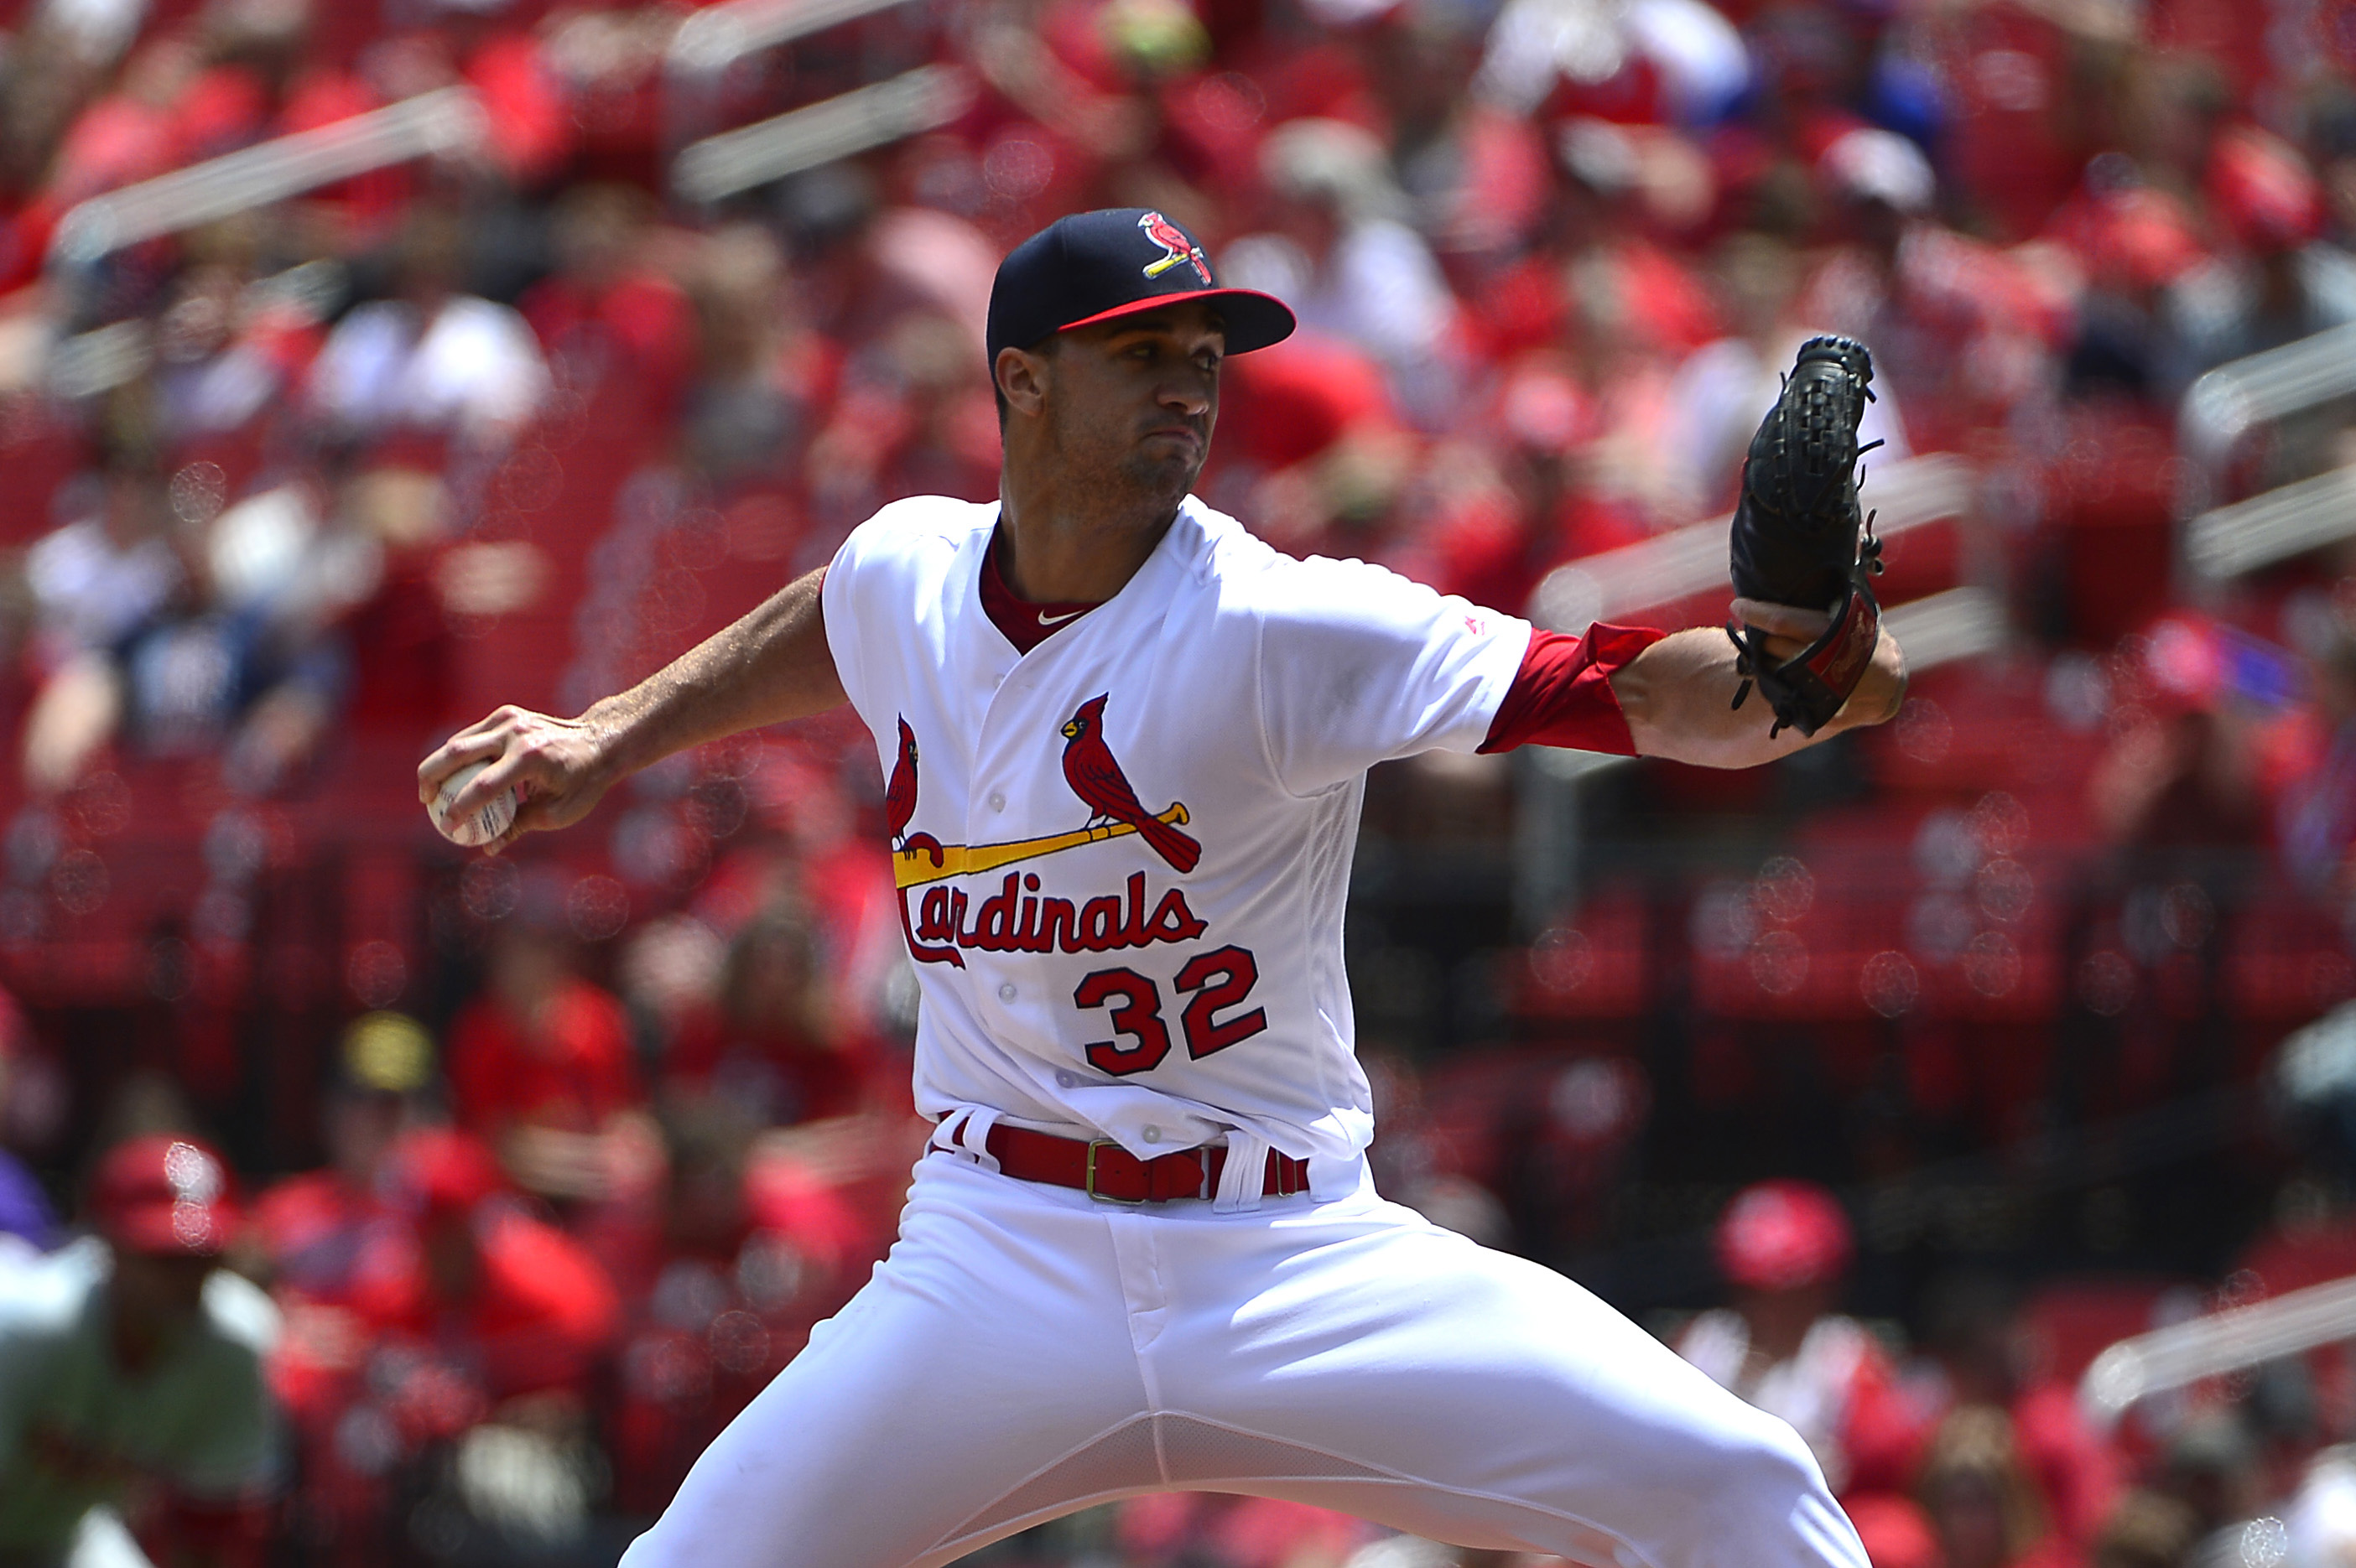 Flaherty Strikes Out 13, Hicks Hits 105 As Rookies Shine In Cardinals Win - 590 The Fan